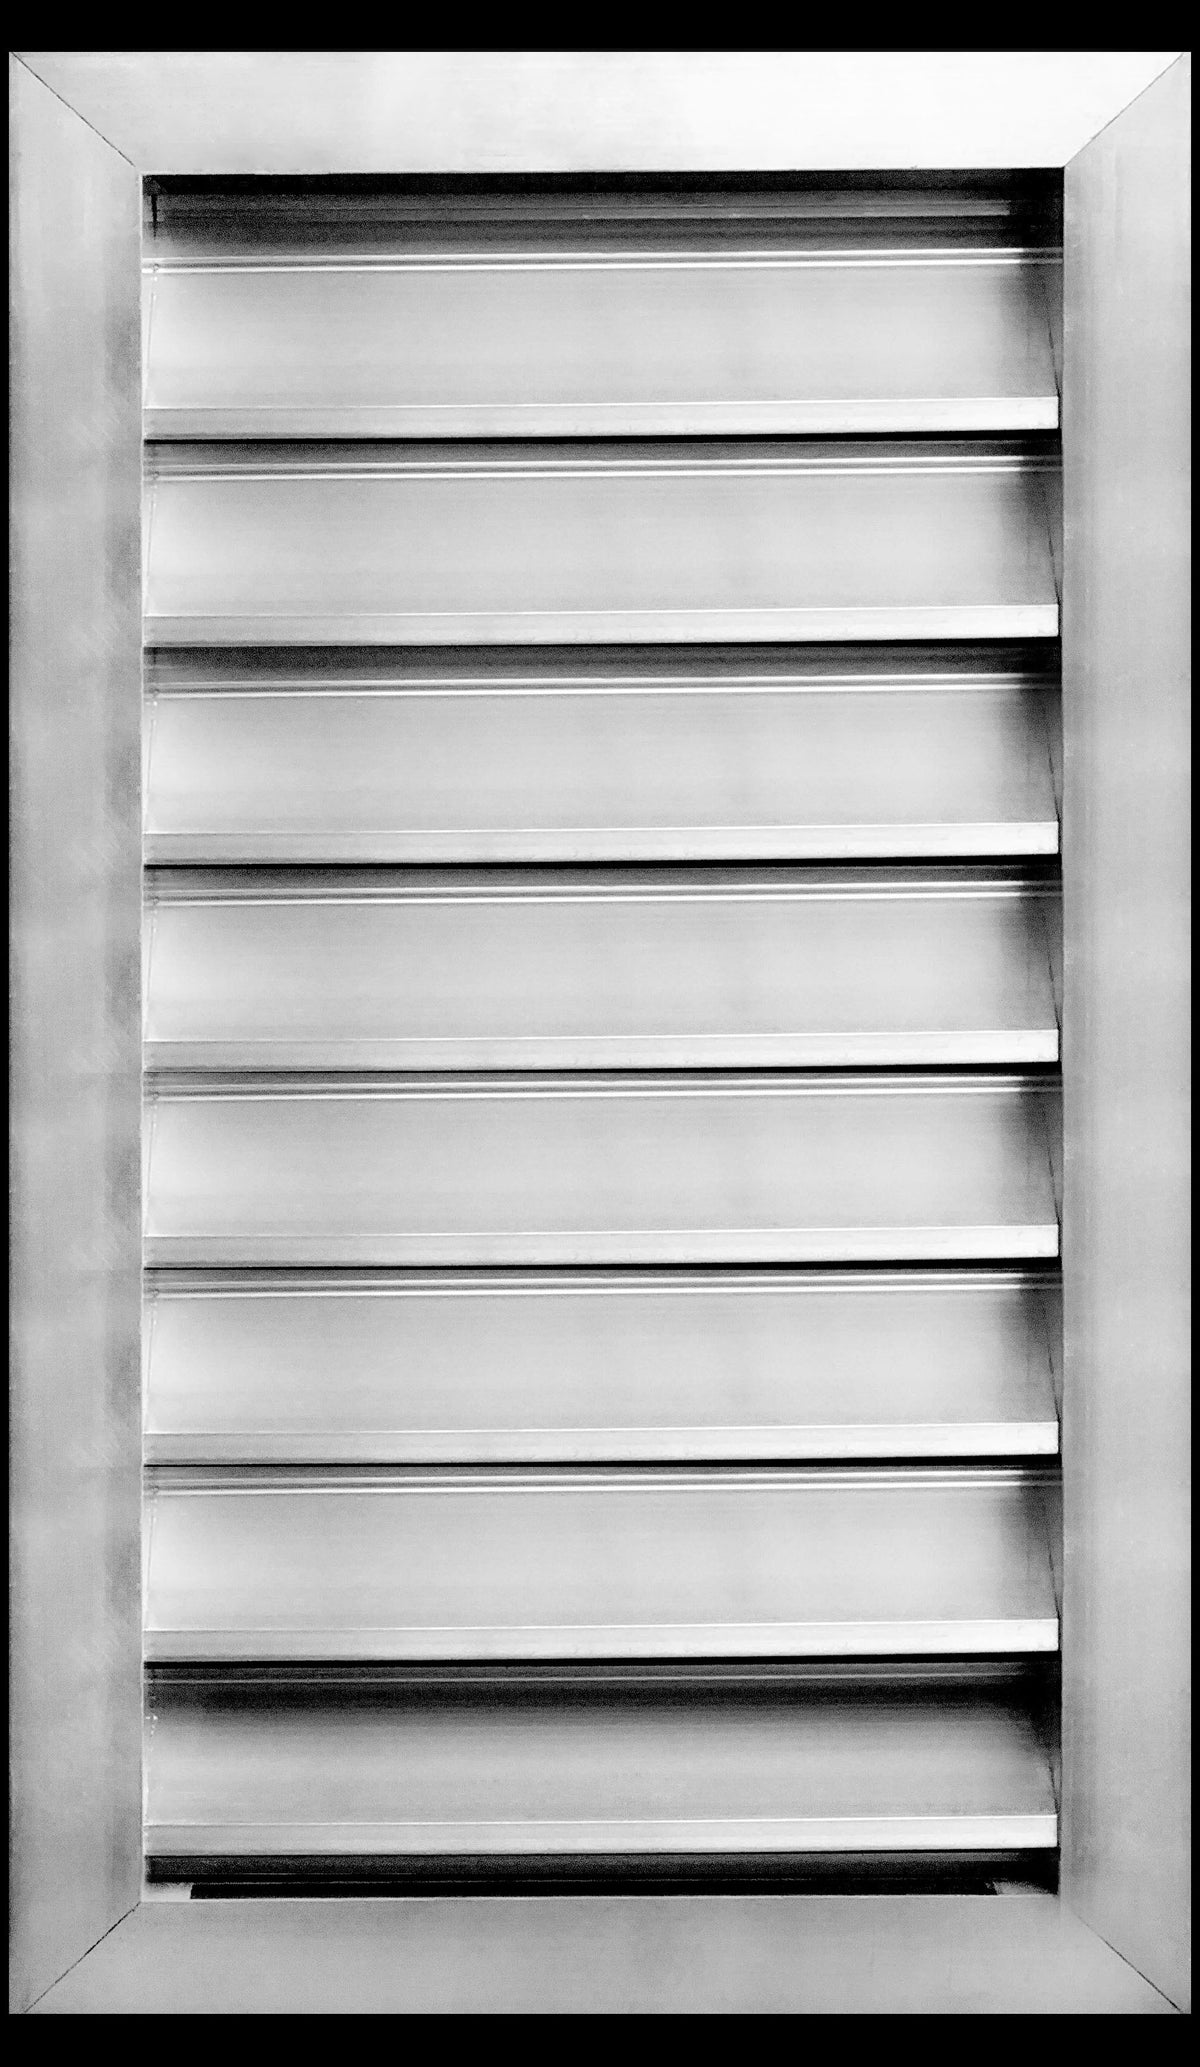 10&quot;w X 18&quot;h Aluminum Outdoor Weather Proof Louvers - Rain &amp; Waterproof Air Vent With Screen Mesh